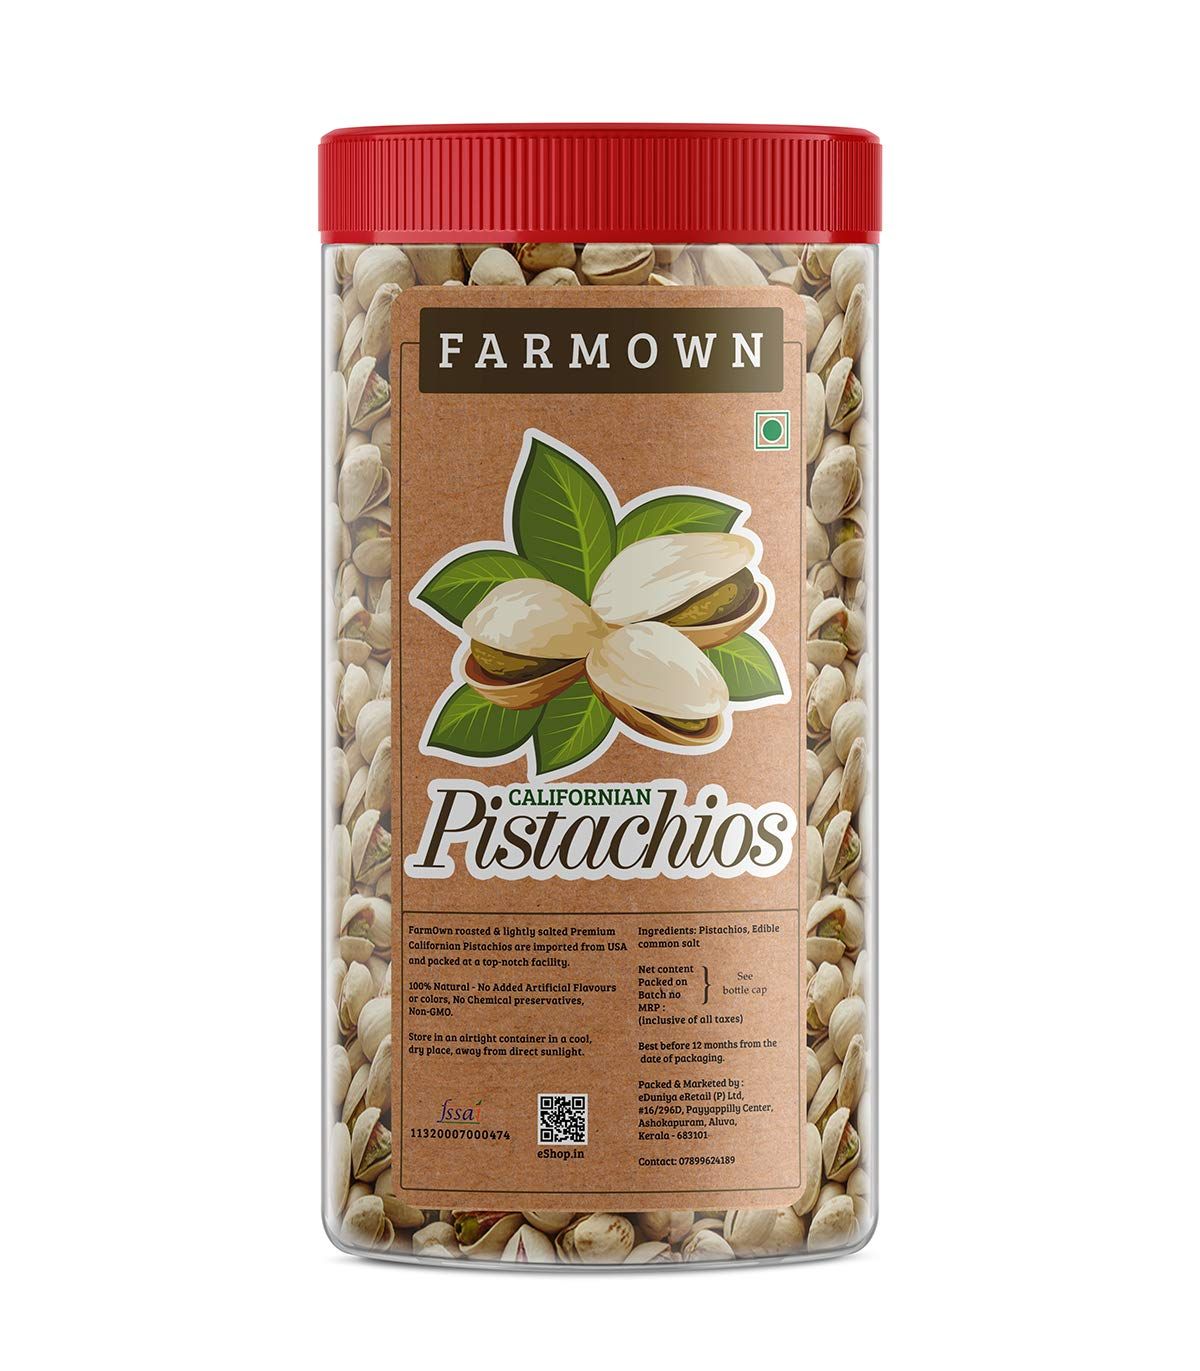 Farmown Roasted And Salted Pistachios Image